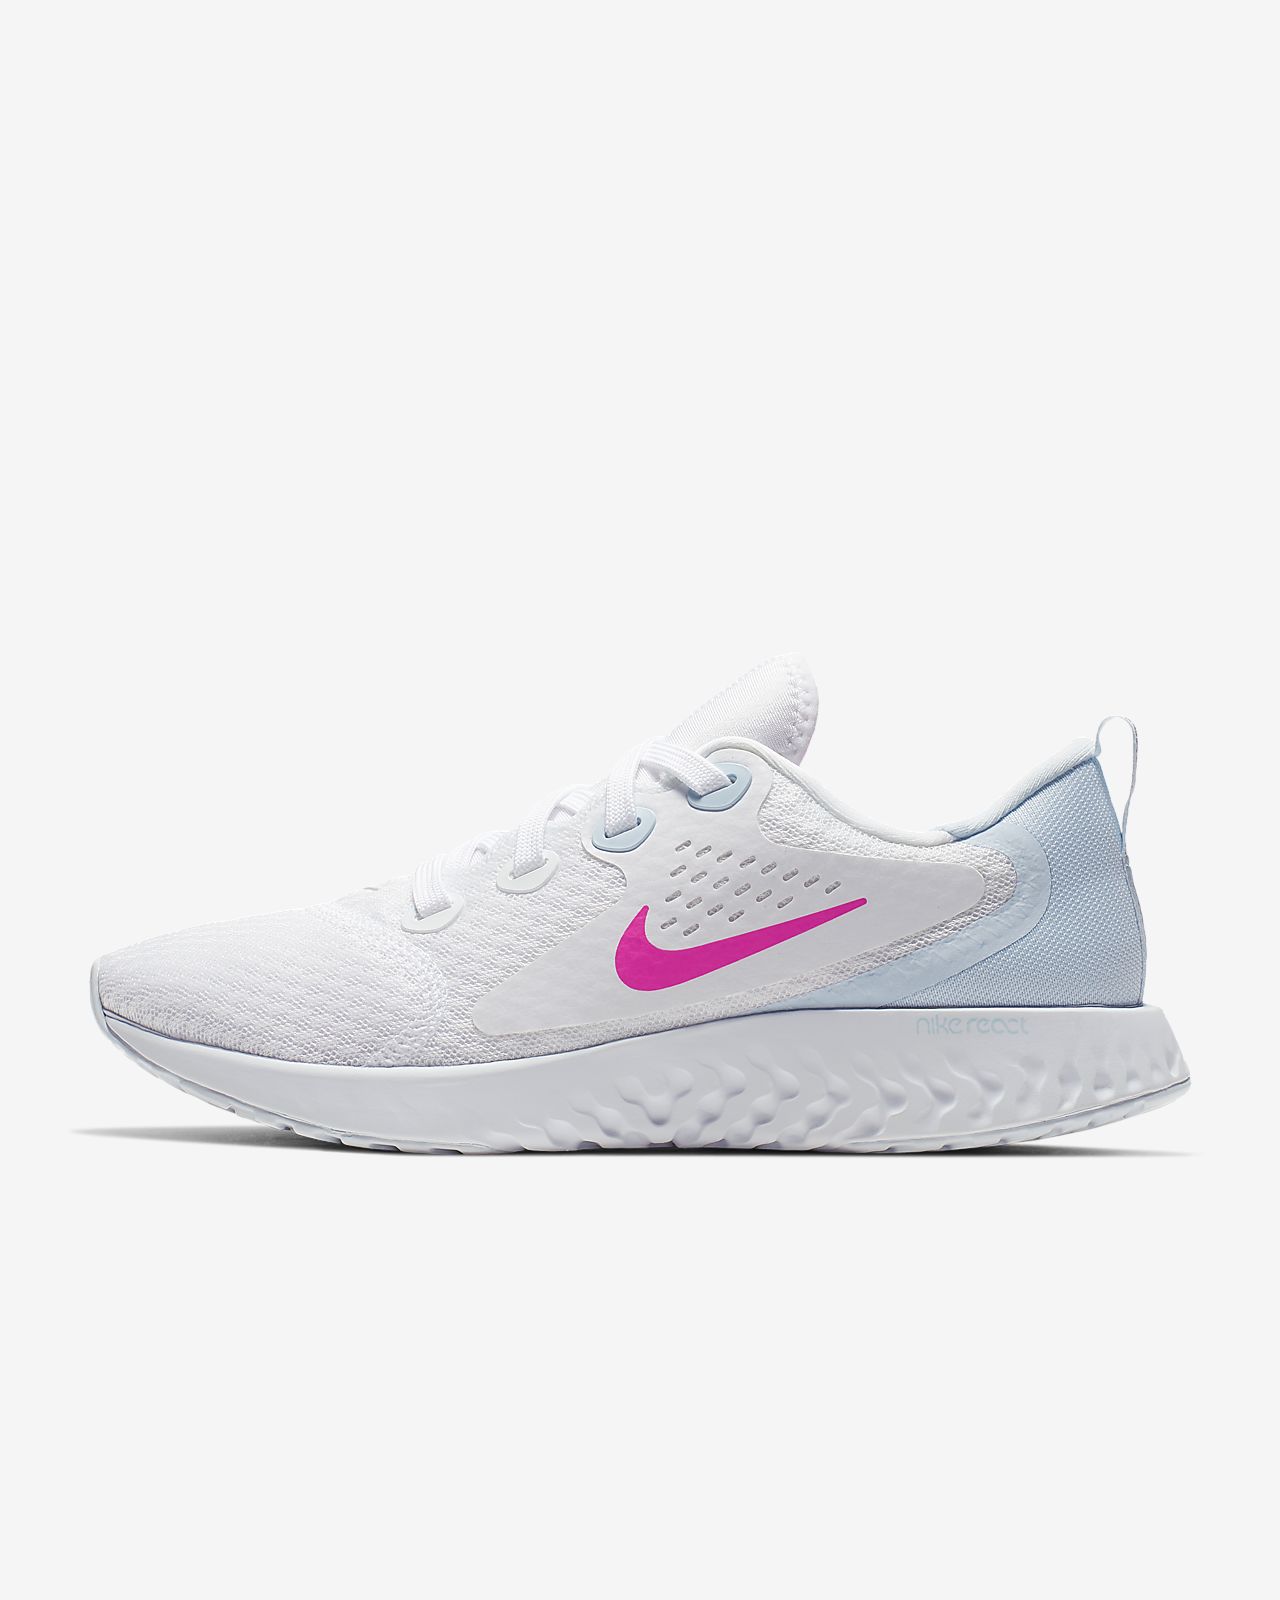 nike legend react mujer opiniones